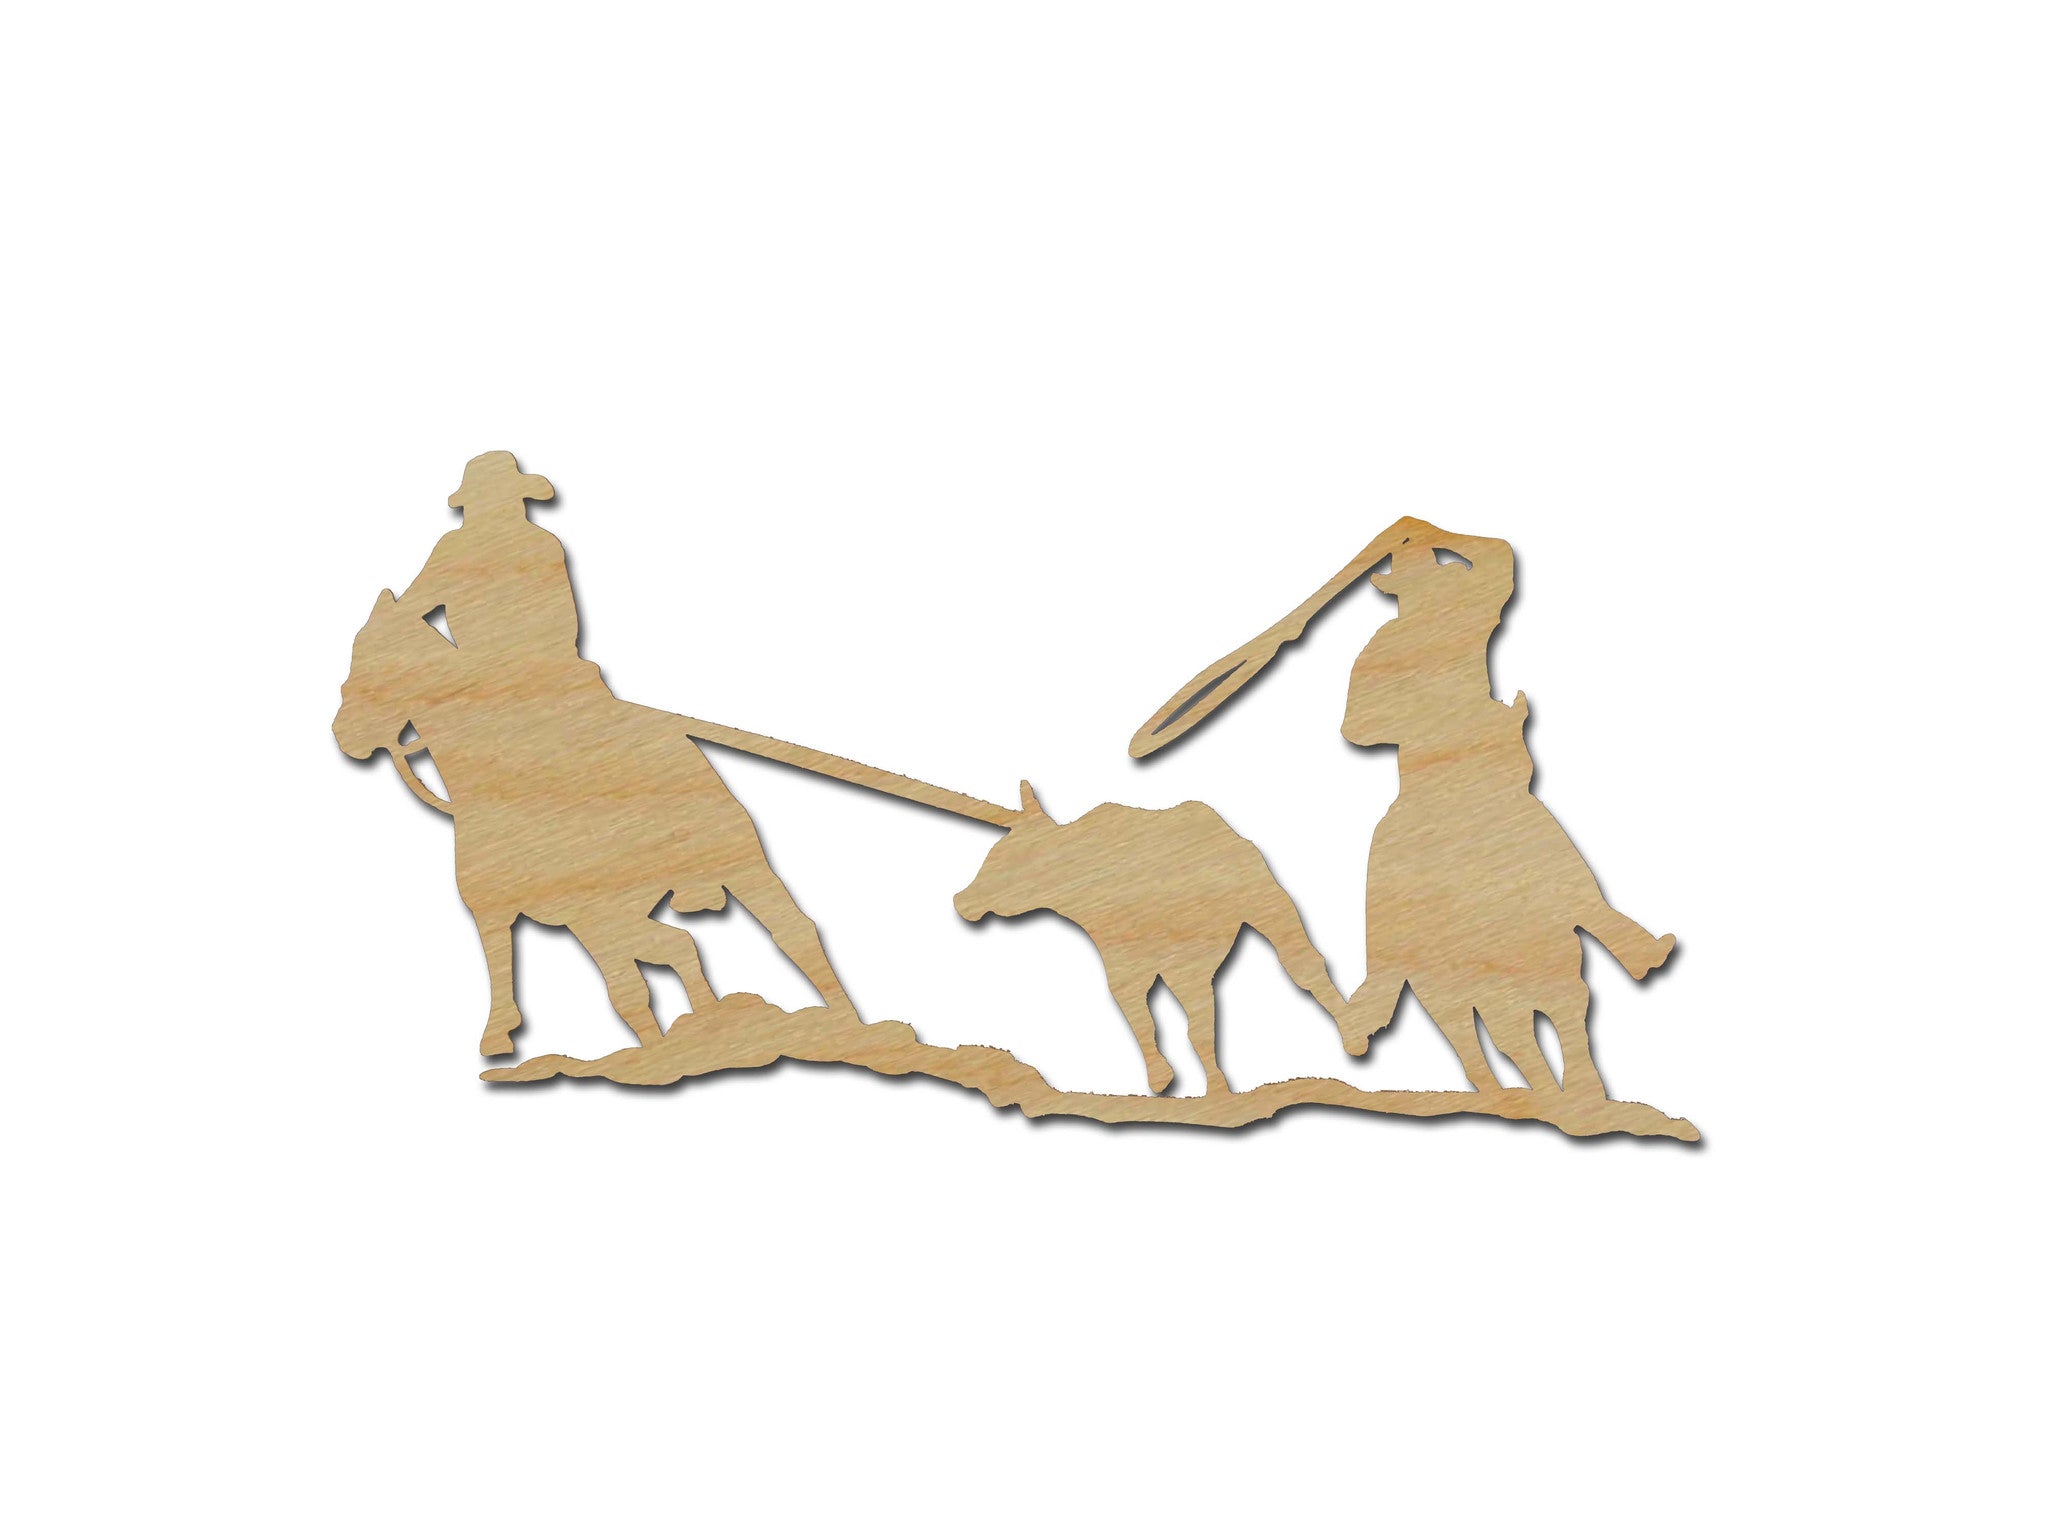 Team Roping Cowboy Shapes Wood Craft Cut Outs